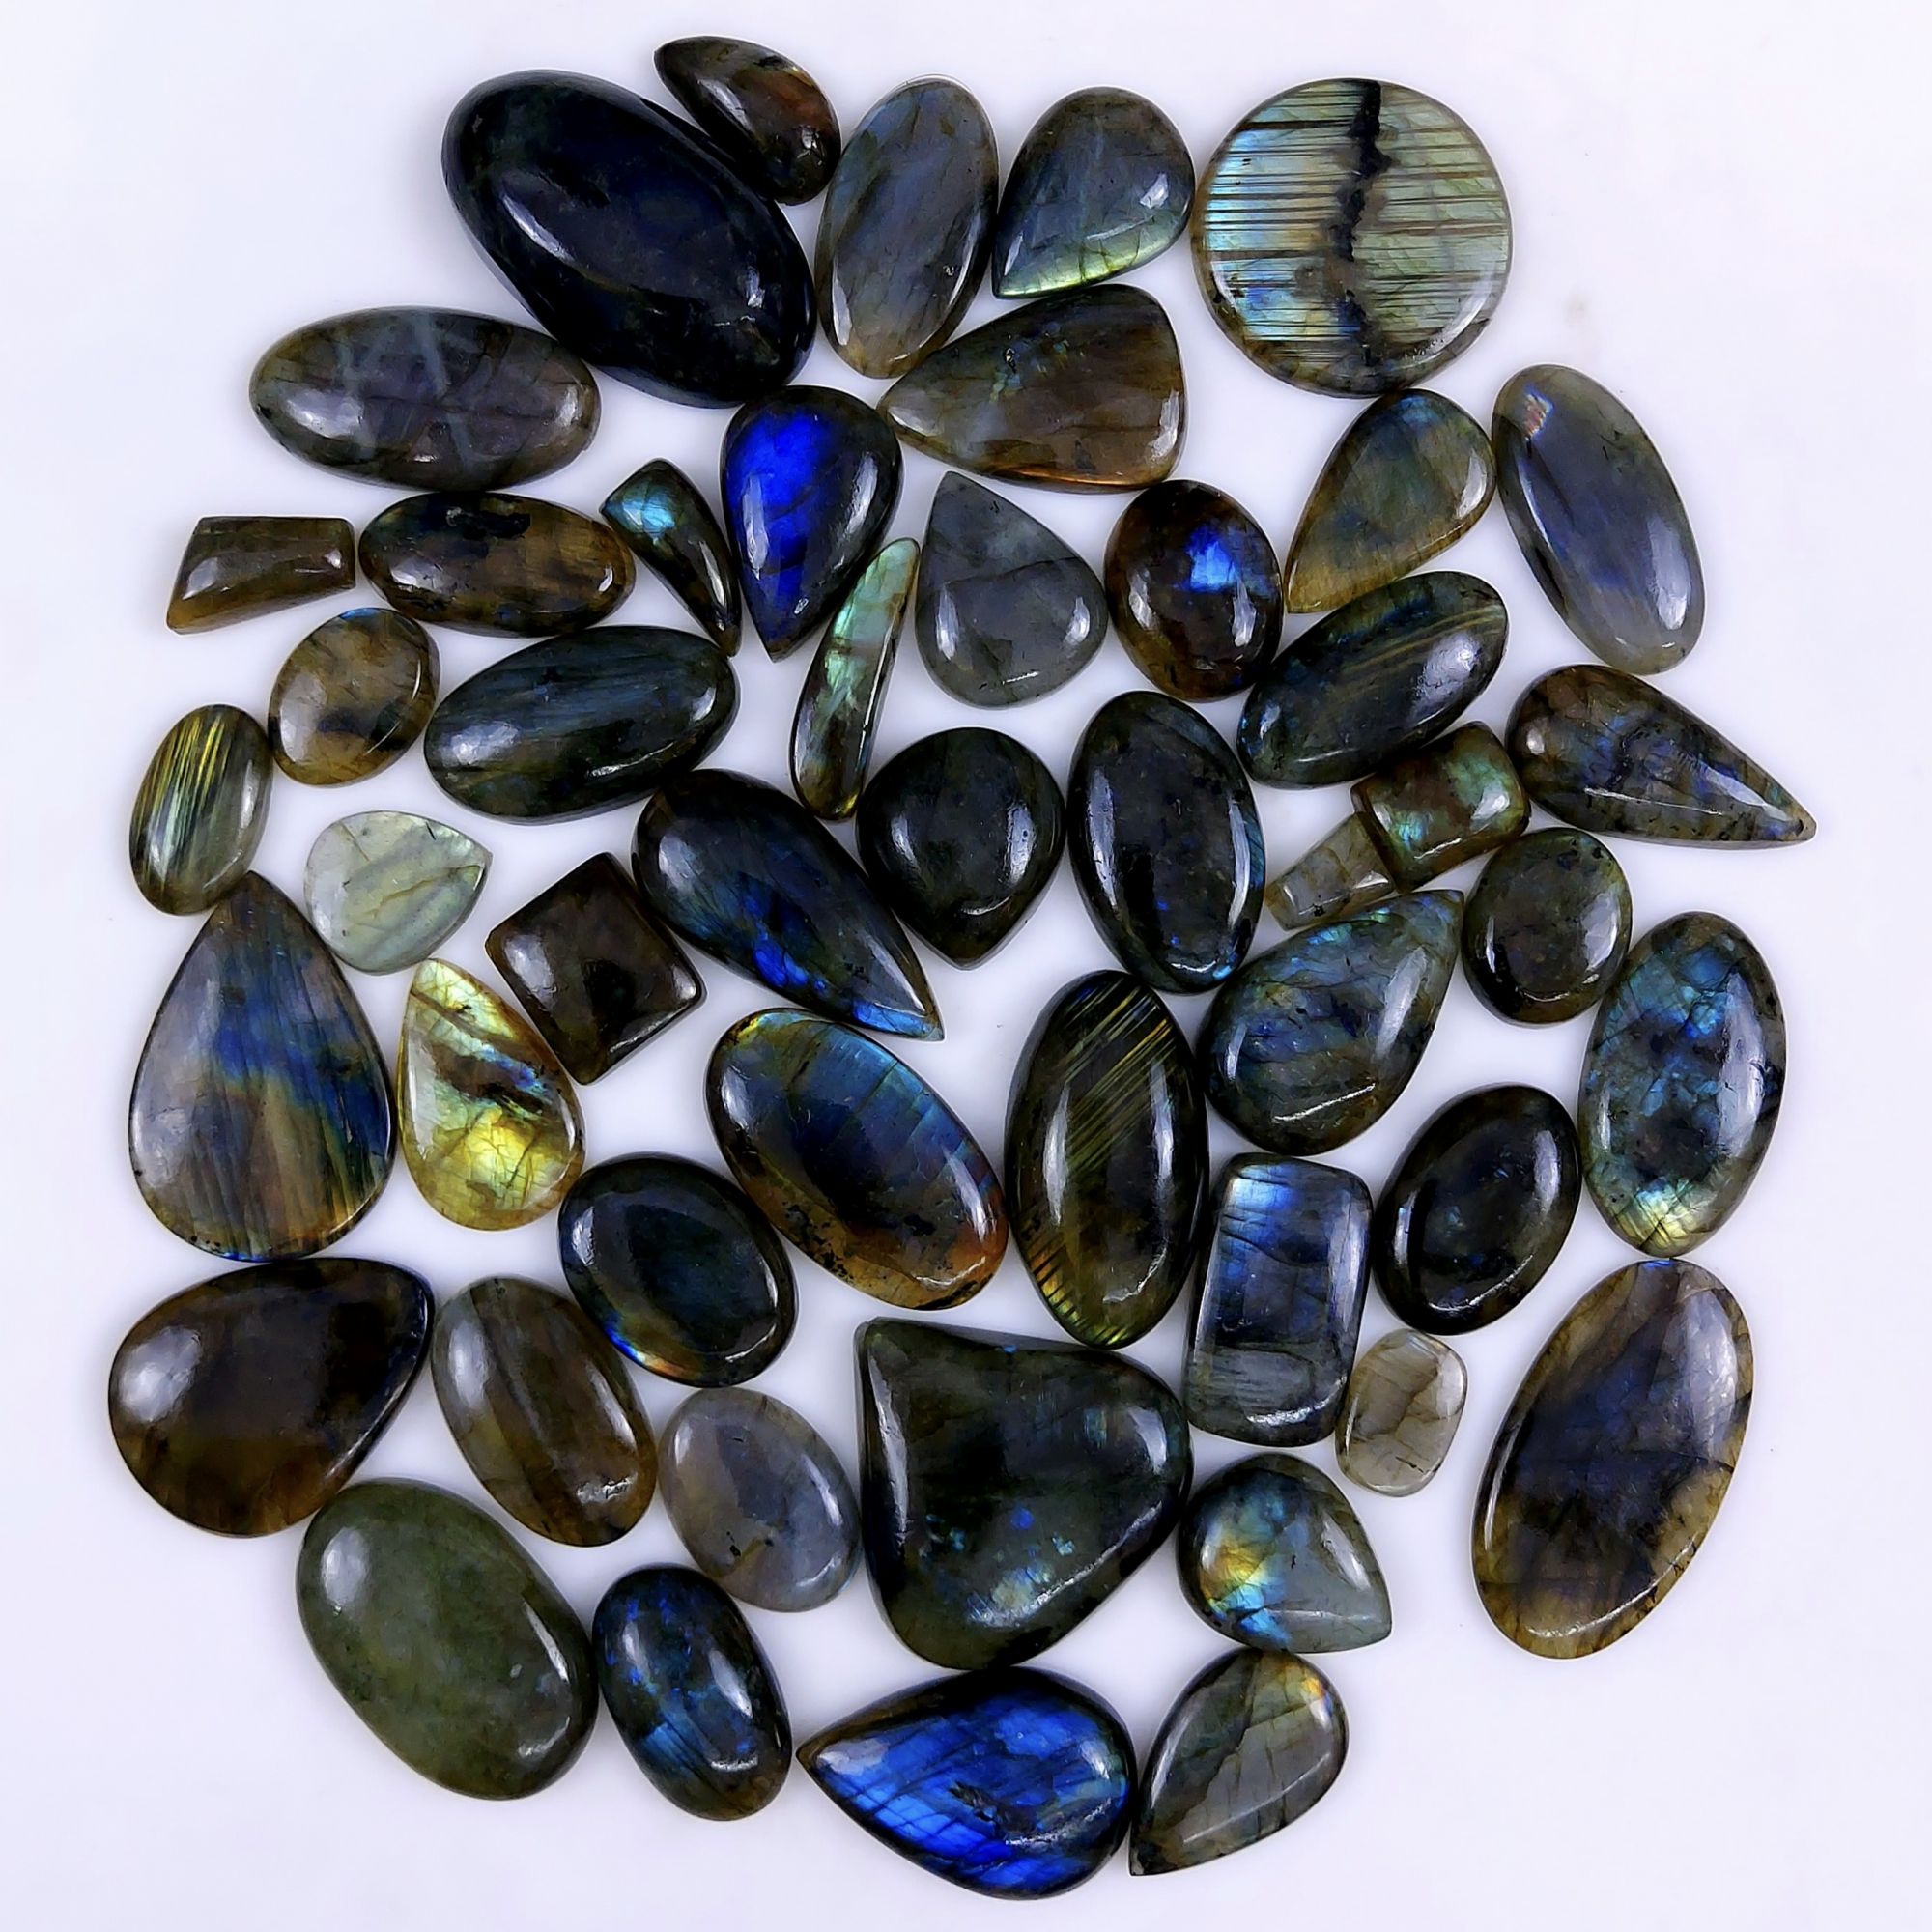 49pc 1720Cts Labradorite Cabochon Multifire Healing Crystal For Jewelry Supplies, Labradorite Necklace Handmade Wire Wrapped Gemstone Pendant 46x26 12x9mm#6285